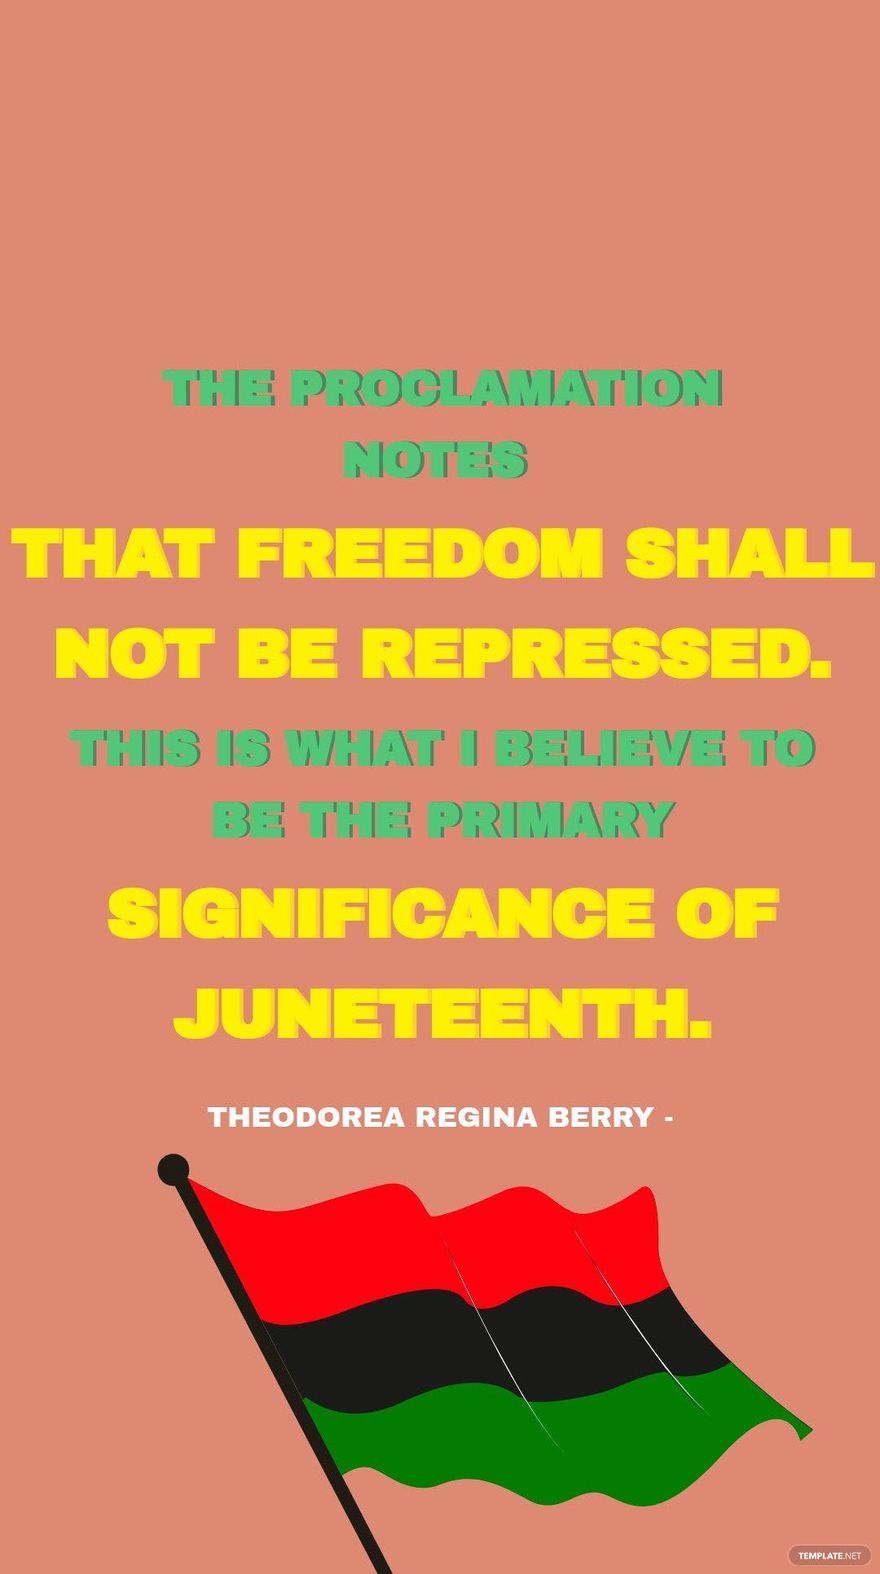 Theodorea Regina Berry - The proclamation notes that freedom shall not be repressed. This is what I believe to be the primary significance of Juneteenth. in JPG